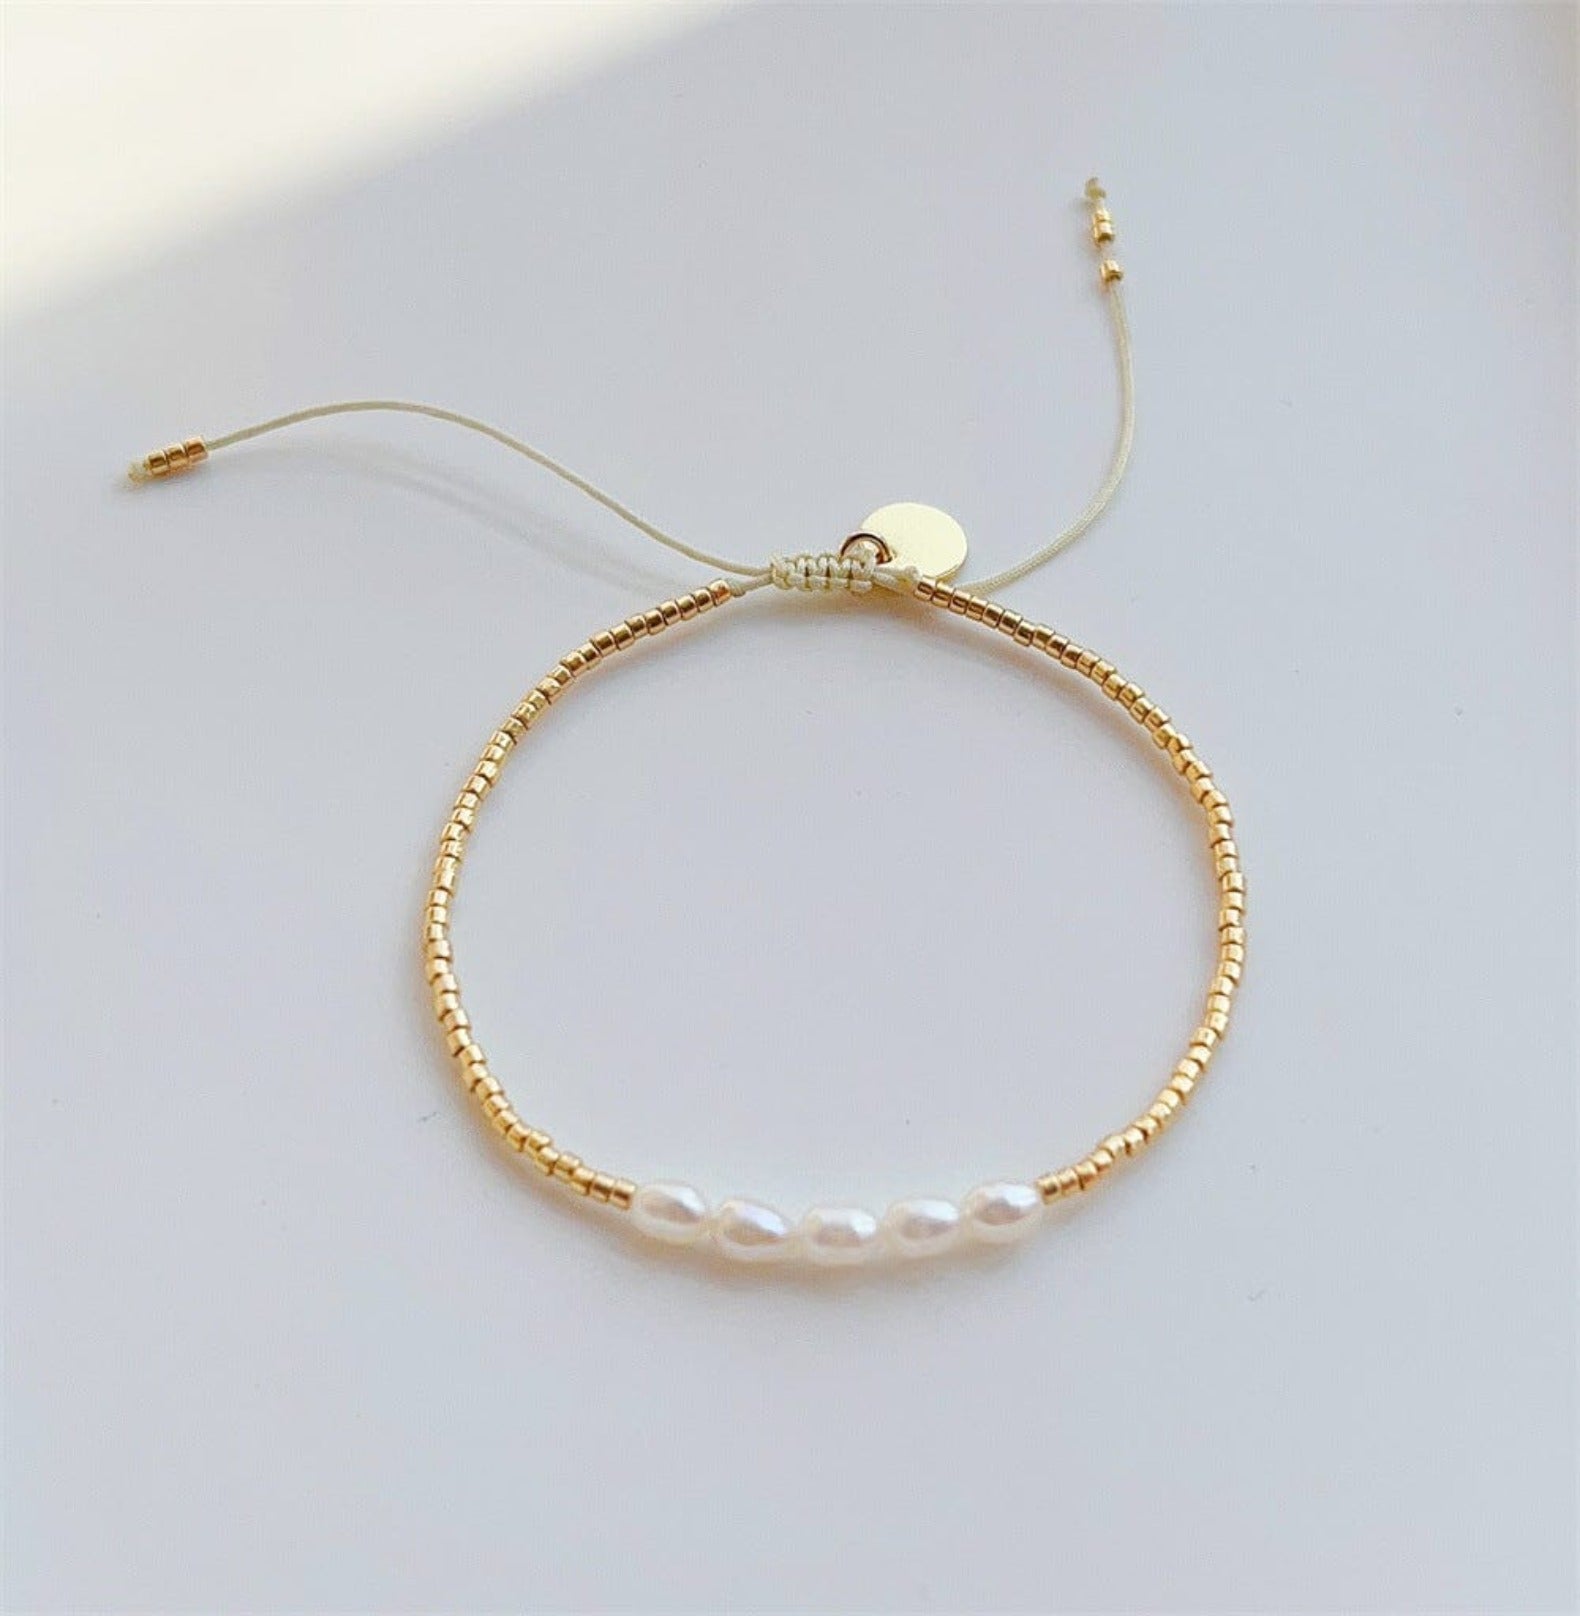 ??????Bracelet Gold Beads Natural Pearl braclet Yubama Jewelry Online Store - The Elegant Designs of Gold and Silver ! 